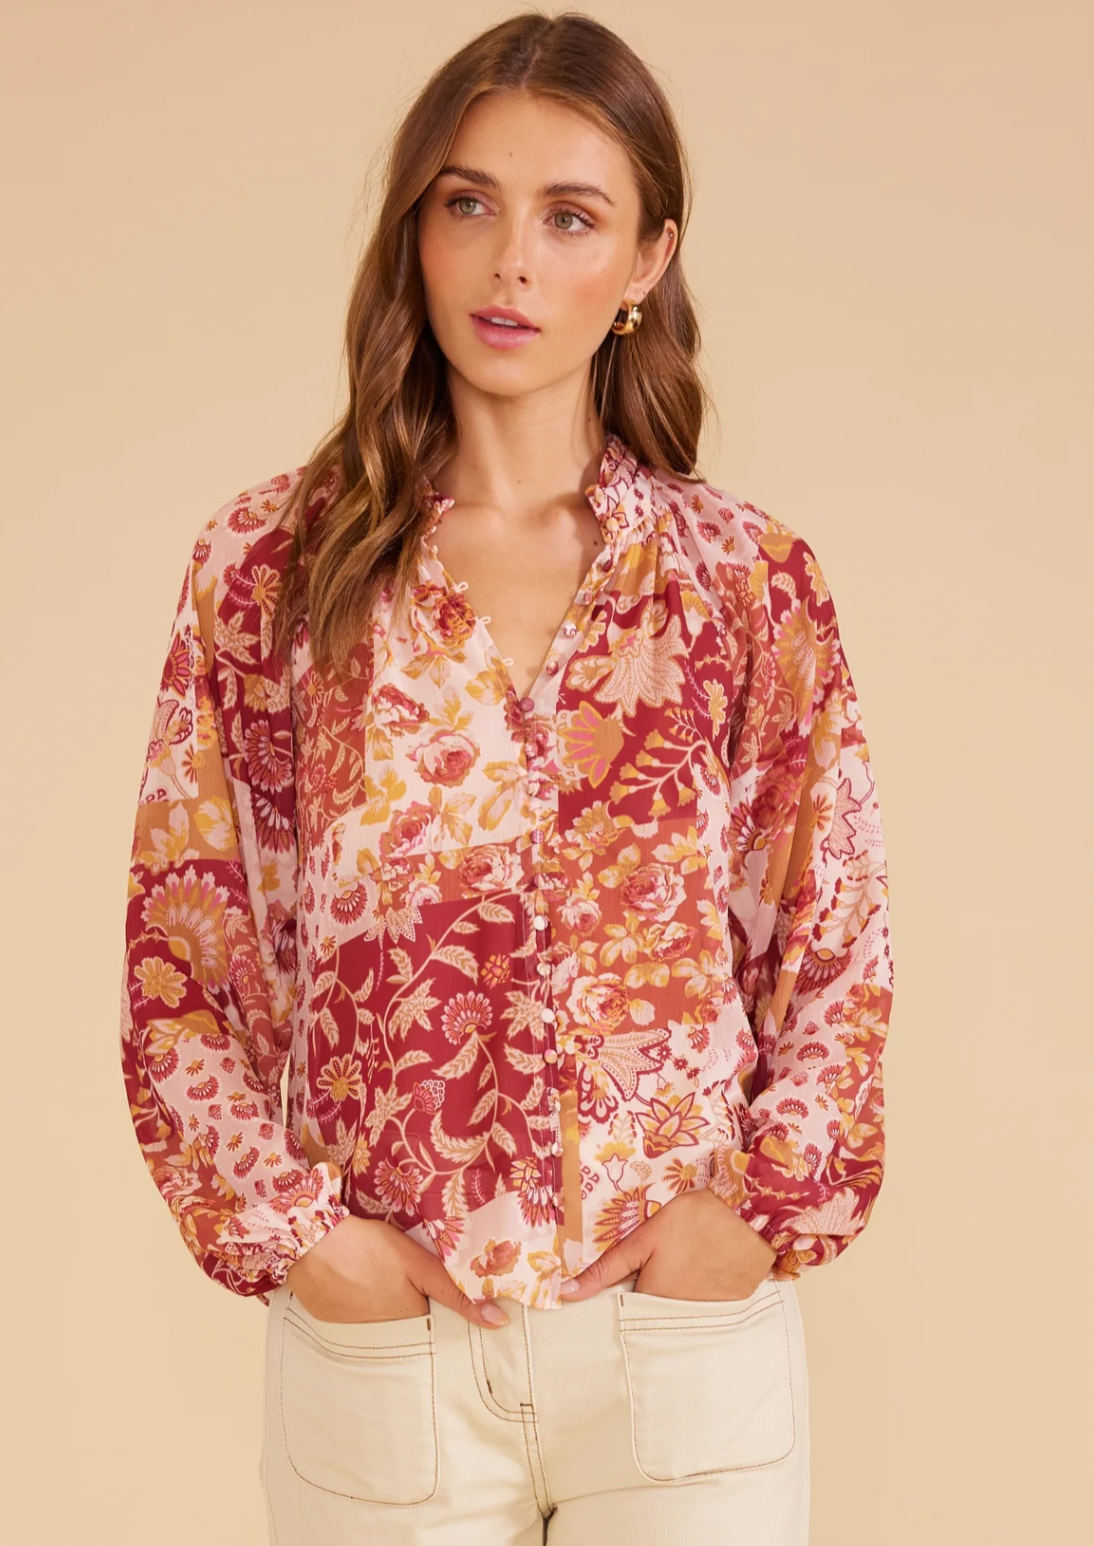 Rylee Blouse by MinkPink Details:  - All-over floral and paisley print button-through blouse - Relaxed fit - High neckline with ruched detail - Self-covered buttons with button loops down the centre front - Slightly sheer - Full-length raglan blouson sleeves with elasticised cuffs